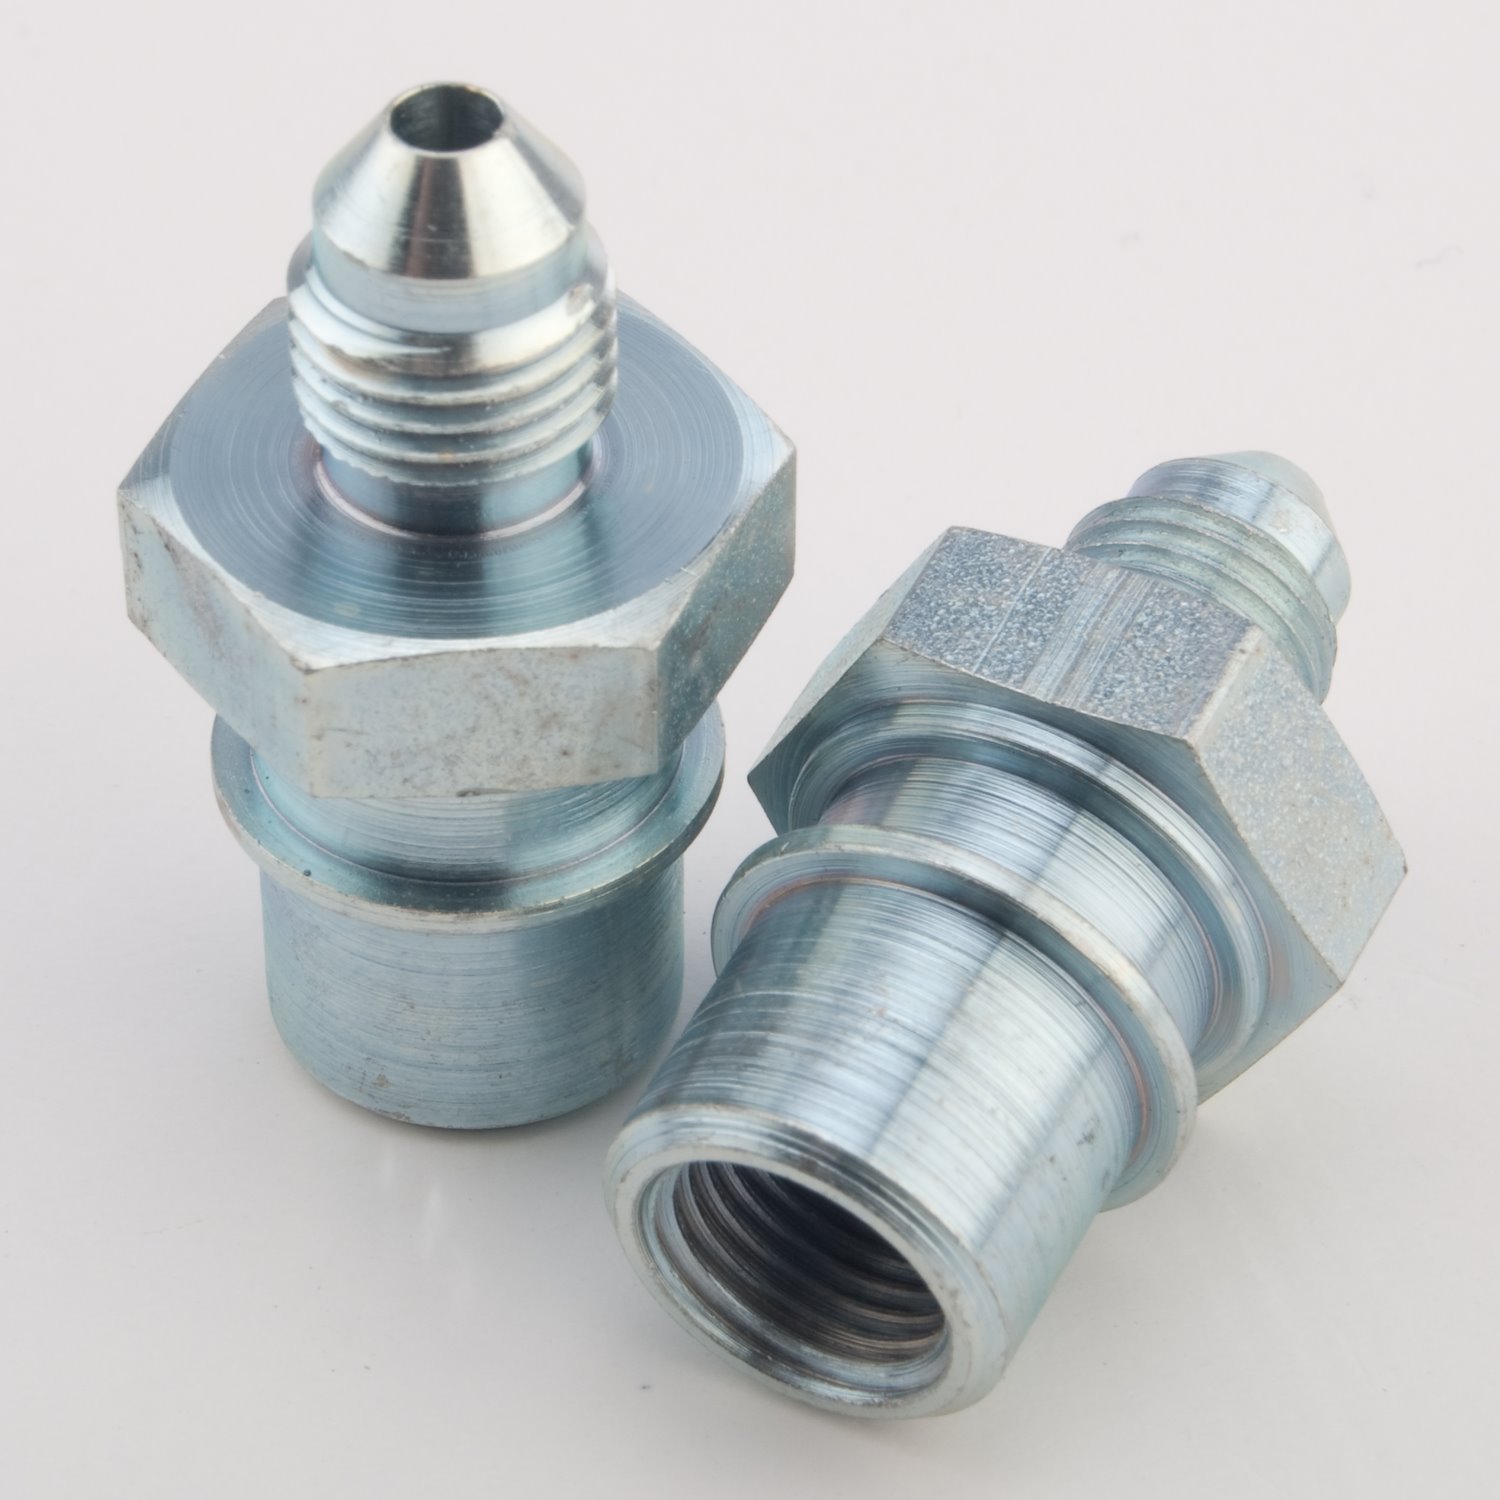 AN to Bubble Flare Female Tube Adapter Fittings -3AN x 10mm x 1.0